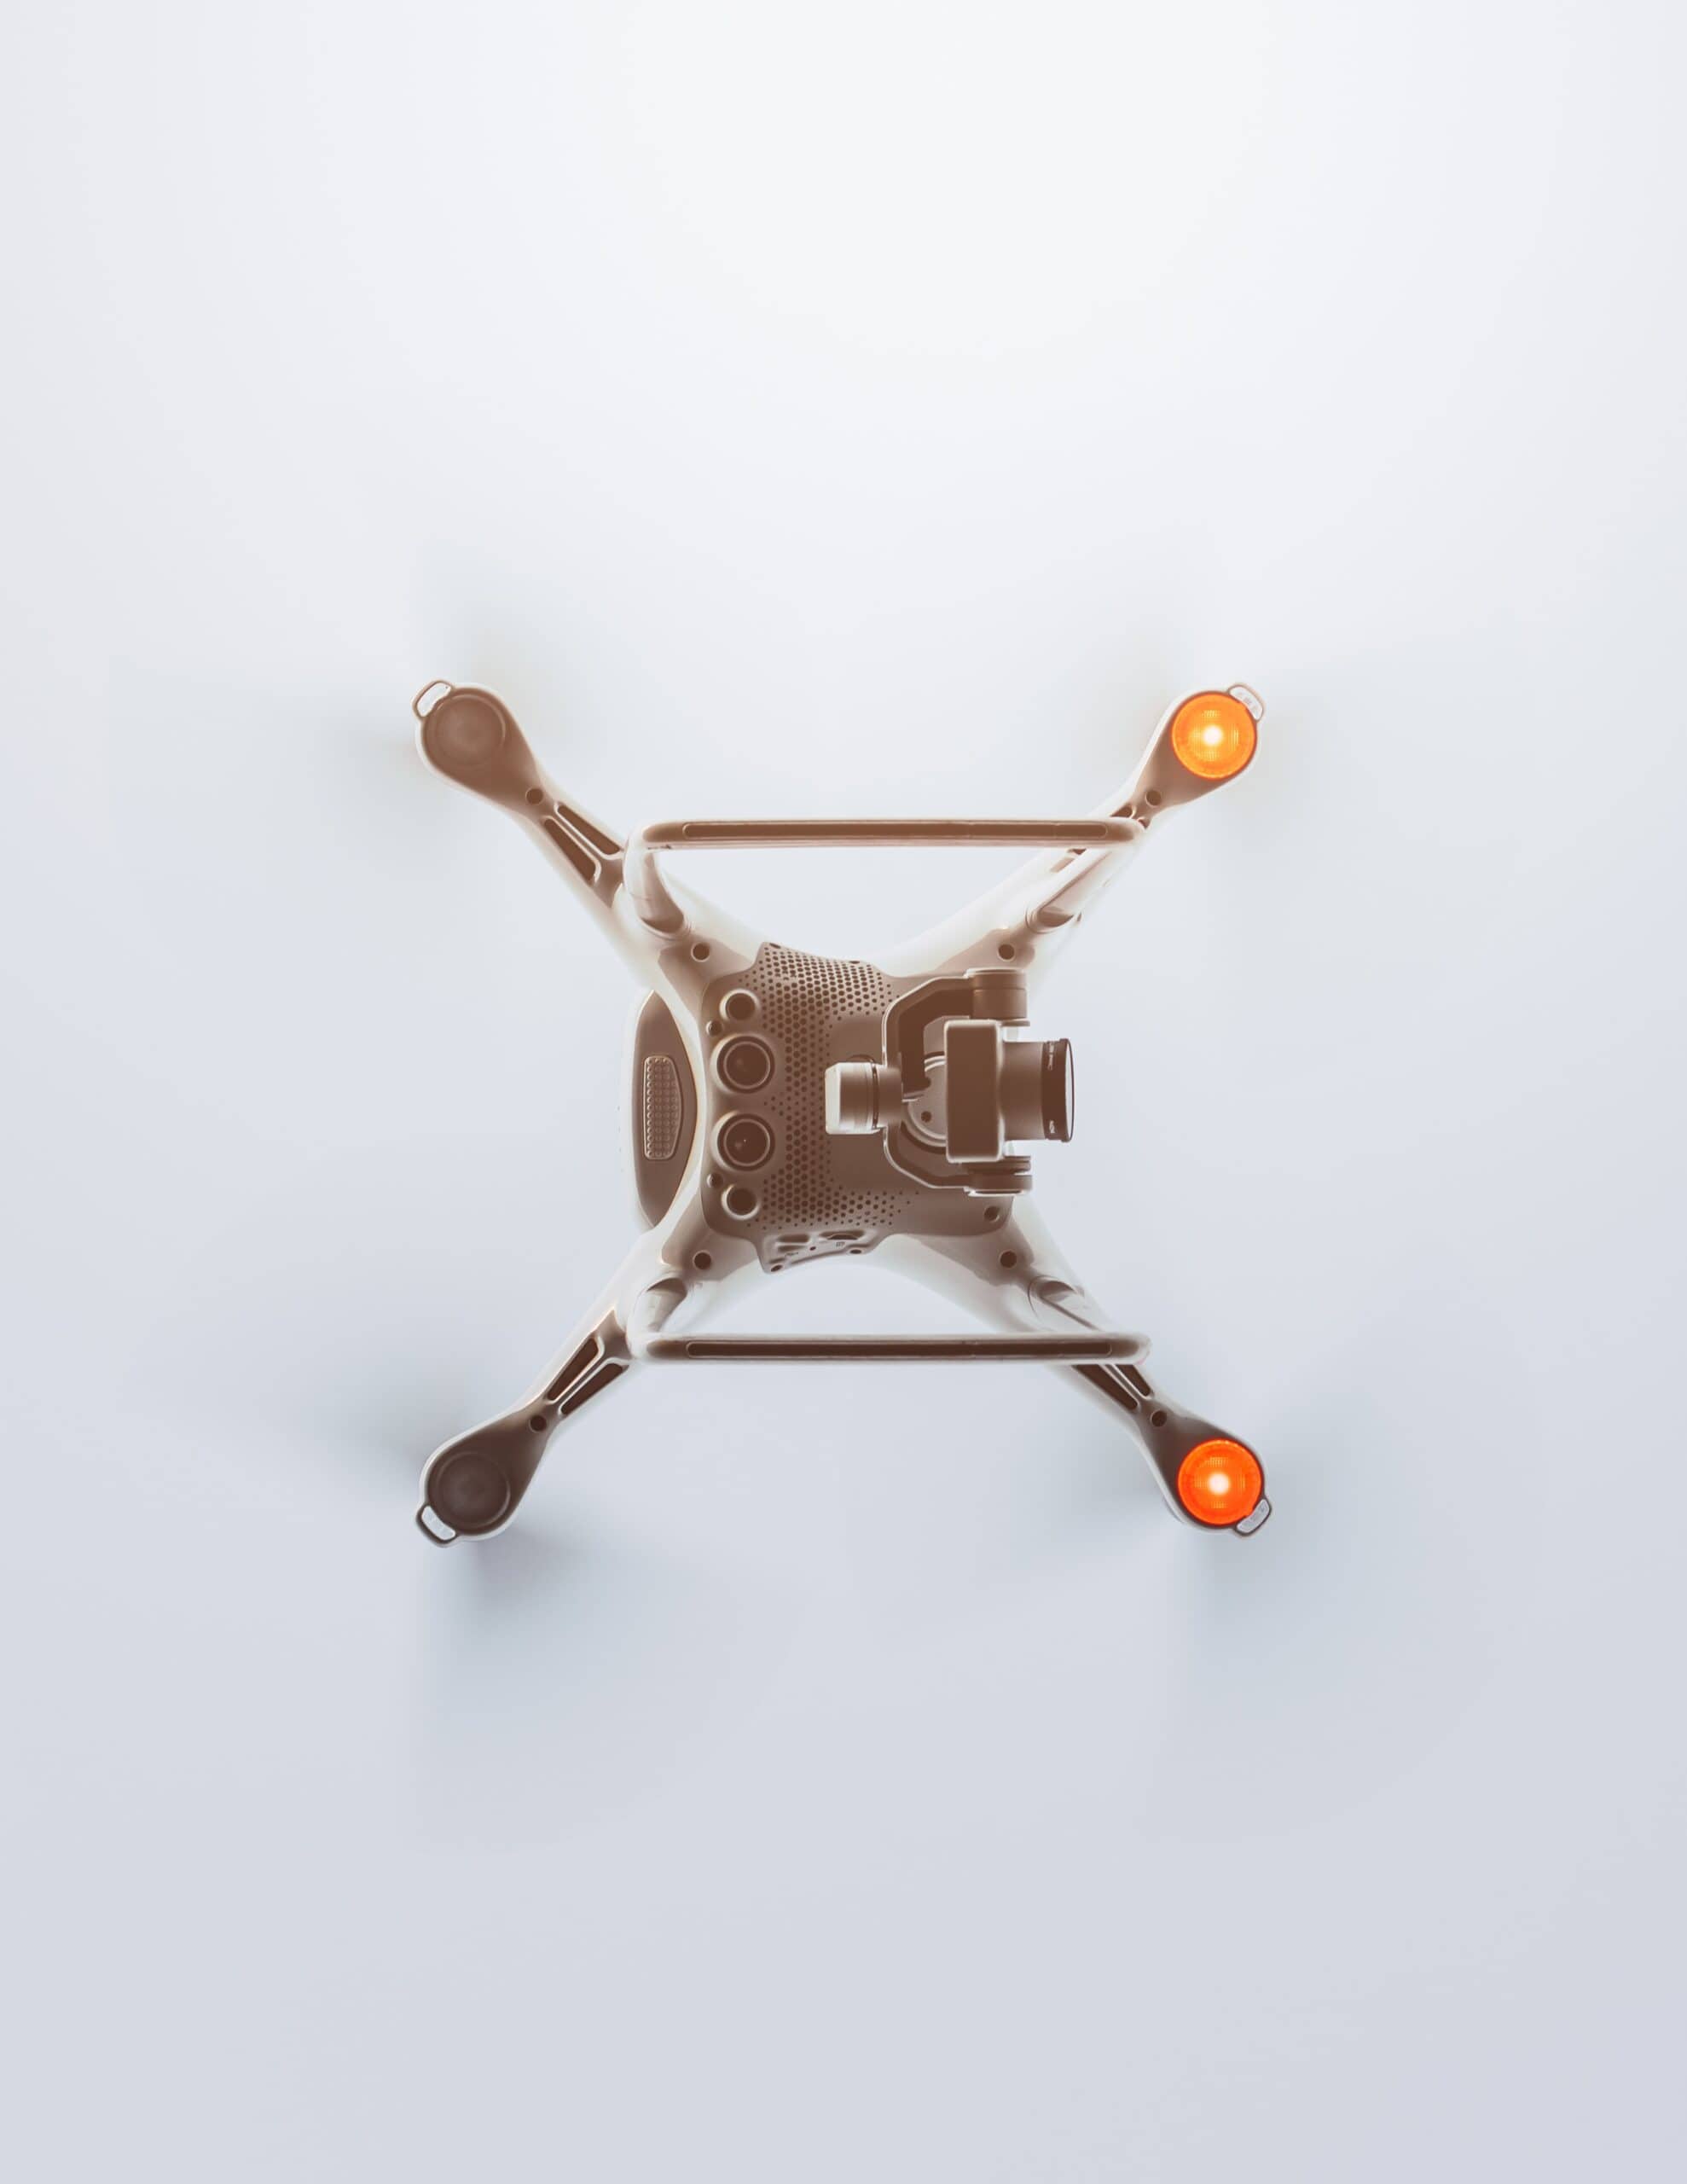 Eyes in the Sky: How Drones Enhance Home Security